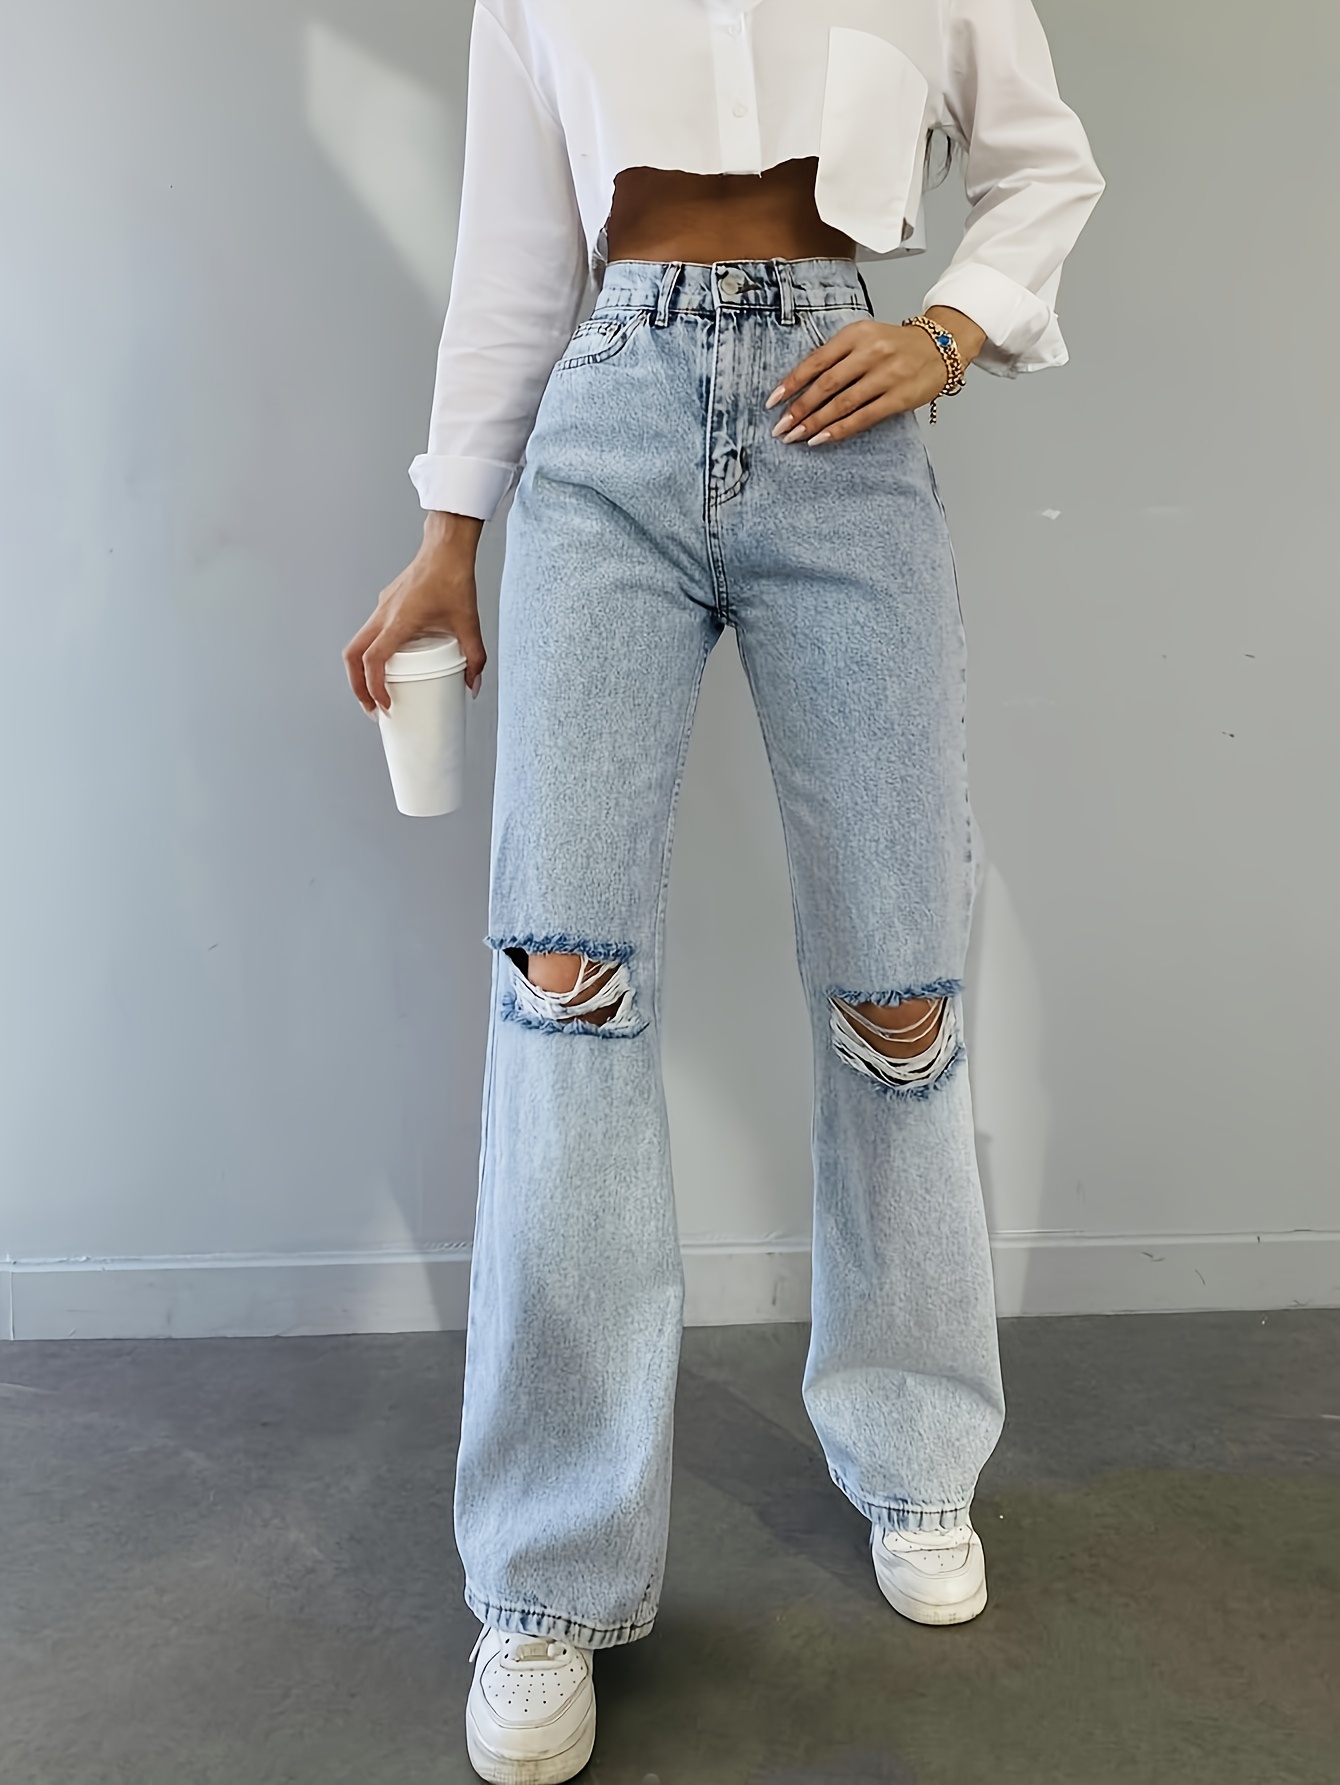 Ripped Knee Cut Distressed Jeans, Light Wash Slash Pocket Button * Casual &  Trendy Pants For Every Day, Women's Denim Jeans & Clothing